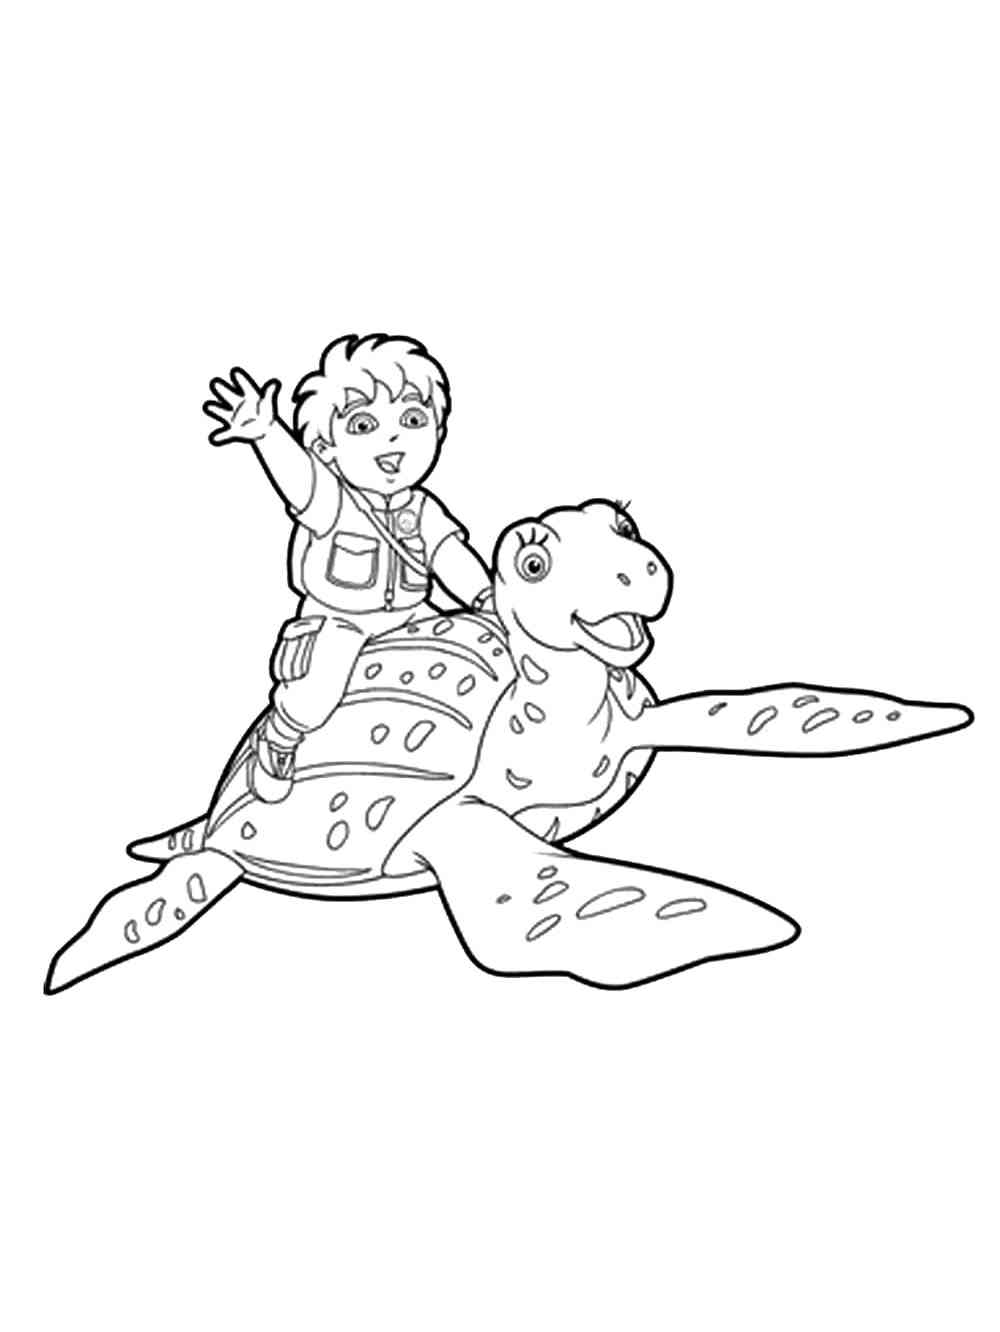 Diego 17 coloring page